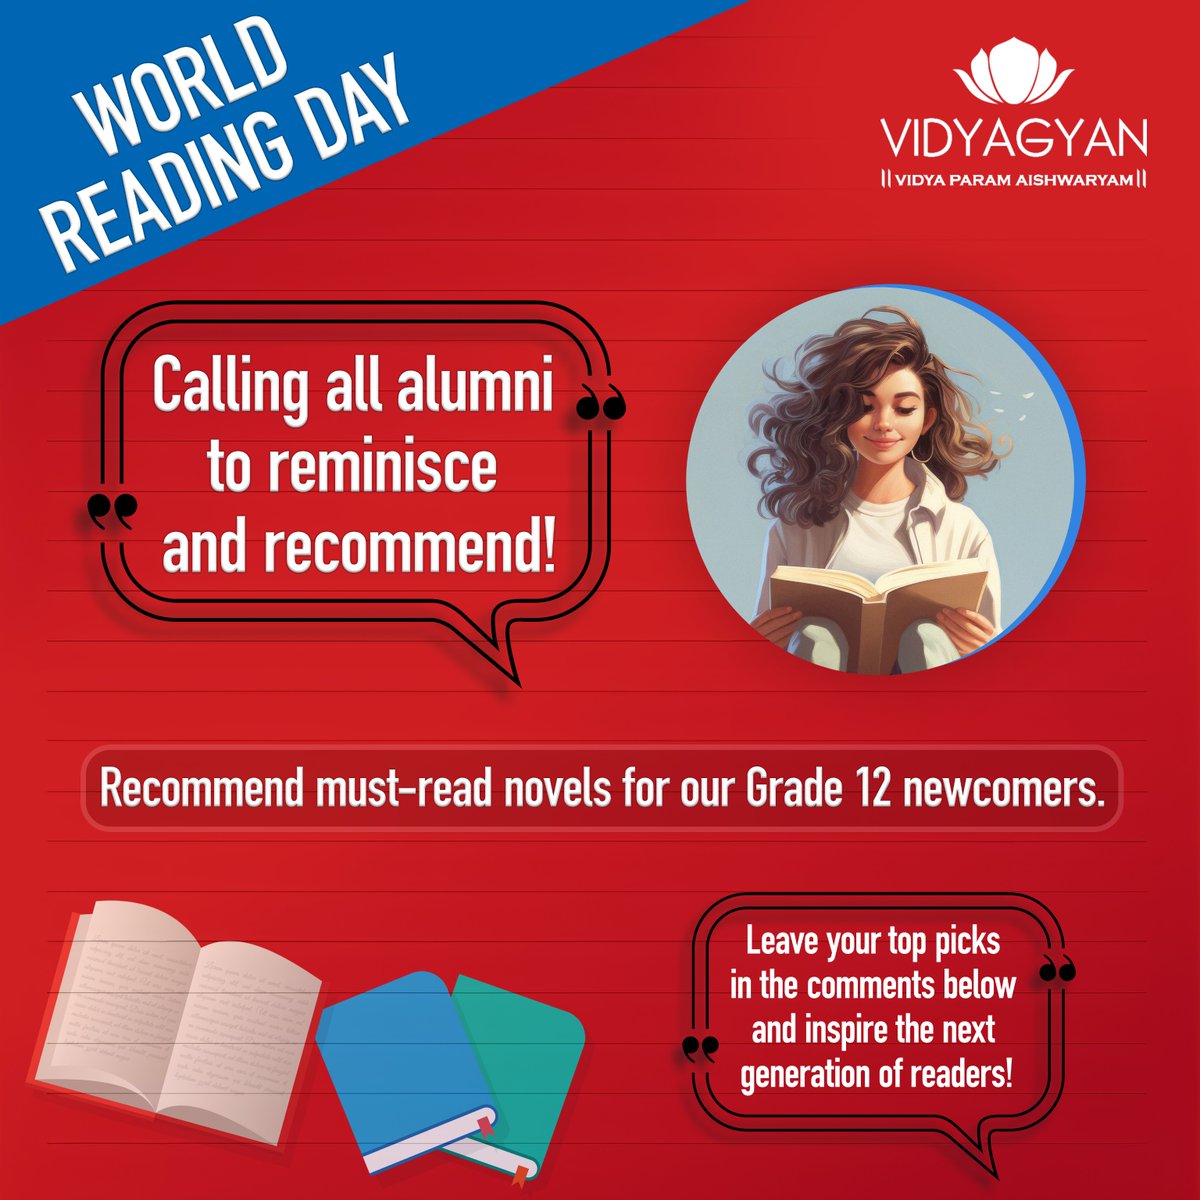 Alumni, let's turn back the pages and inspire! Recommend your favorite must-read novels for our Grade 12 newcomers. Share your literary gems in the comments below and ignite the passion for reading in the next generation! 

#vidyagyanalumni #AlumniRecommendations #ReadingDay